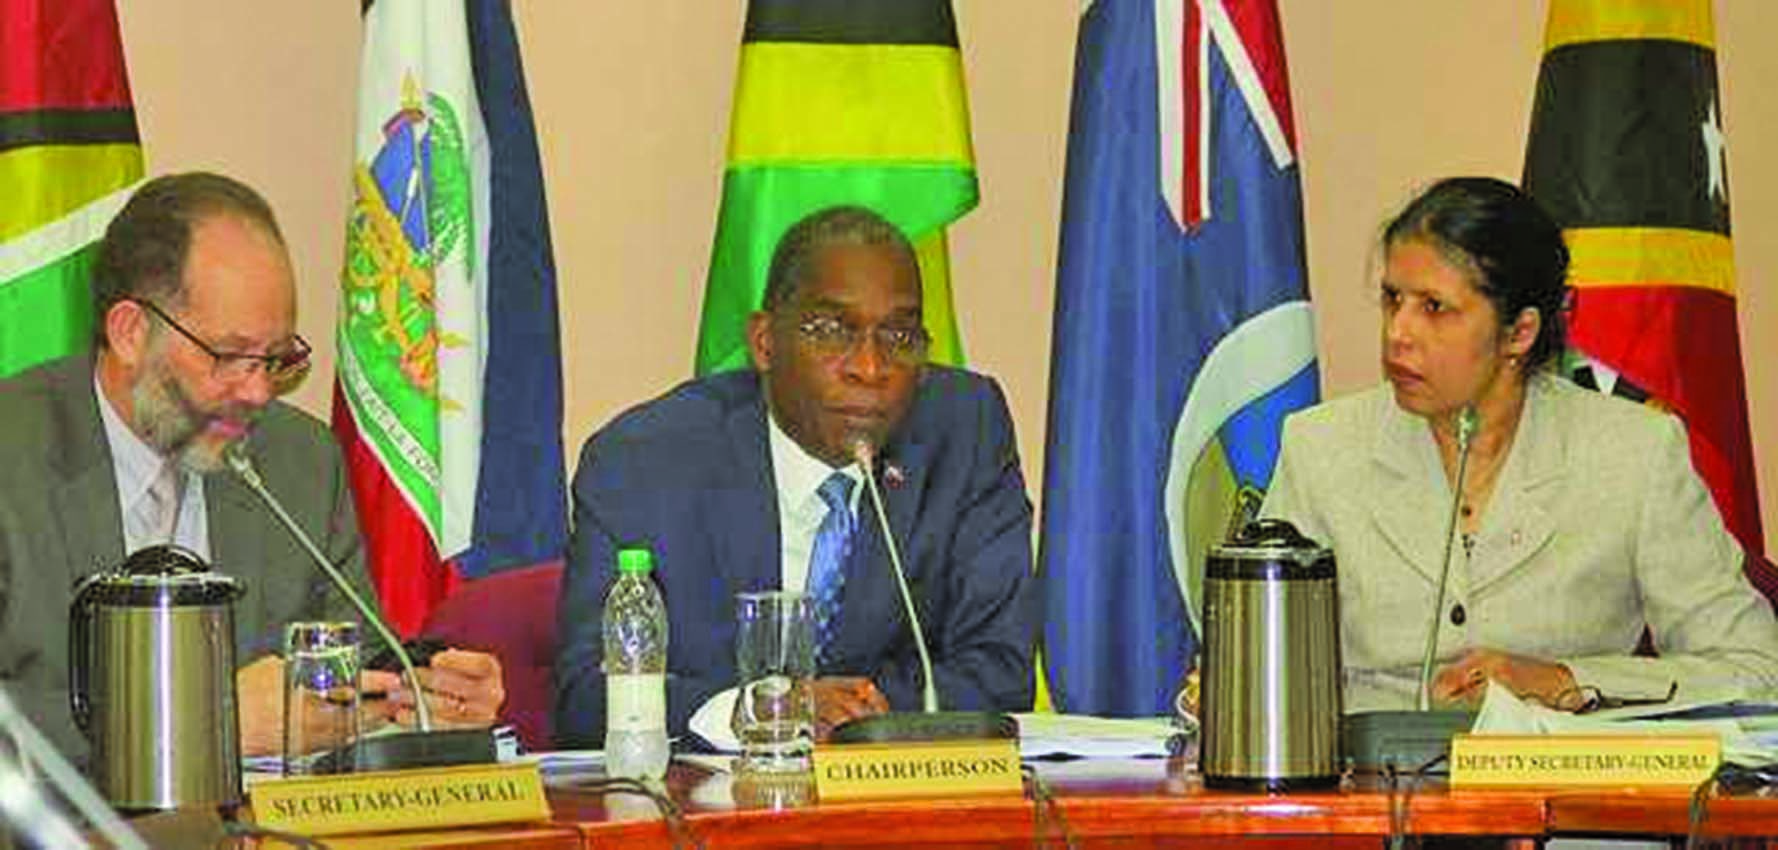 Unified strength of CARICOM drives it to surmount challenges, says SG ...